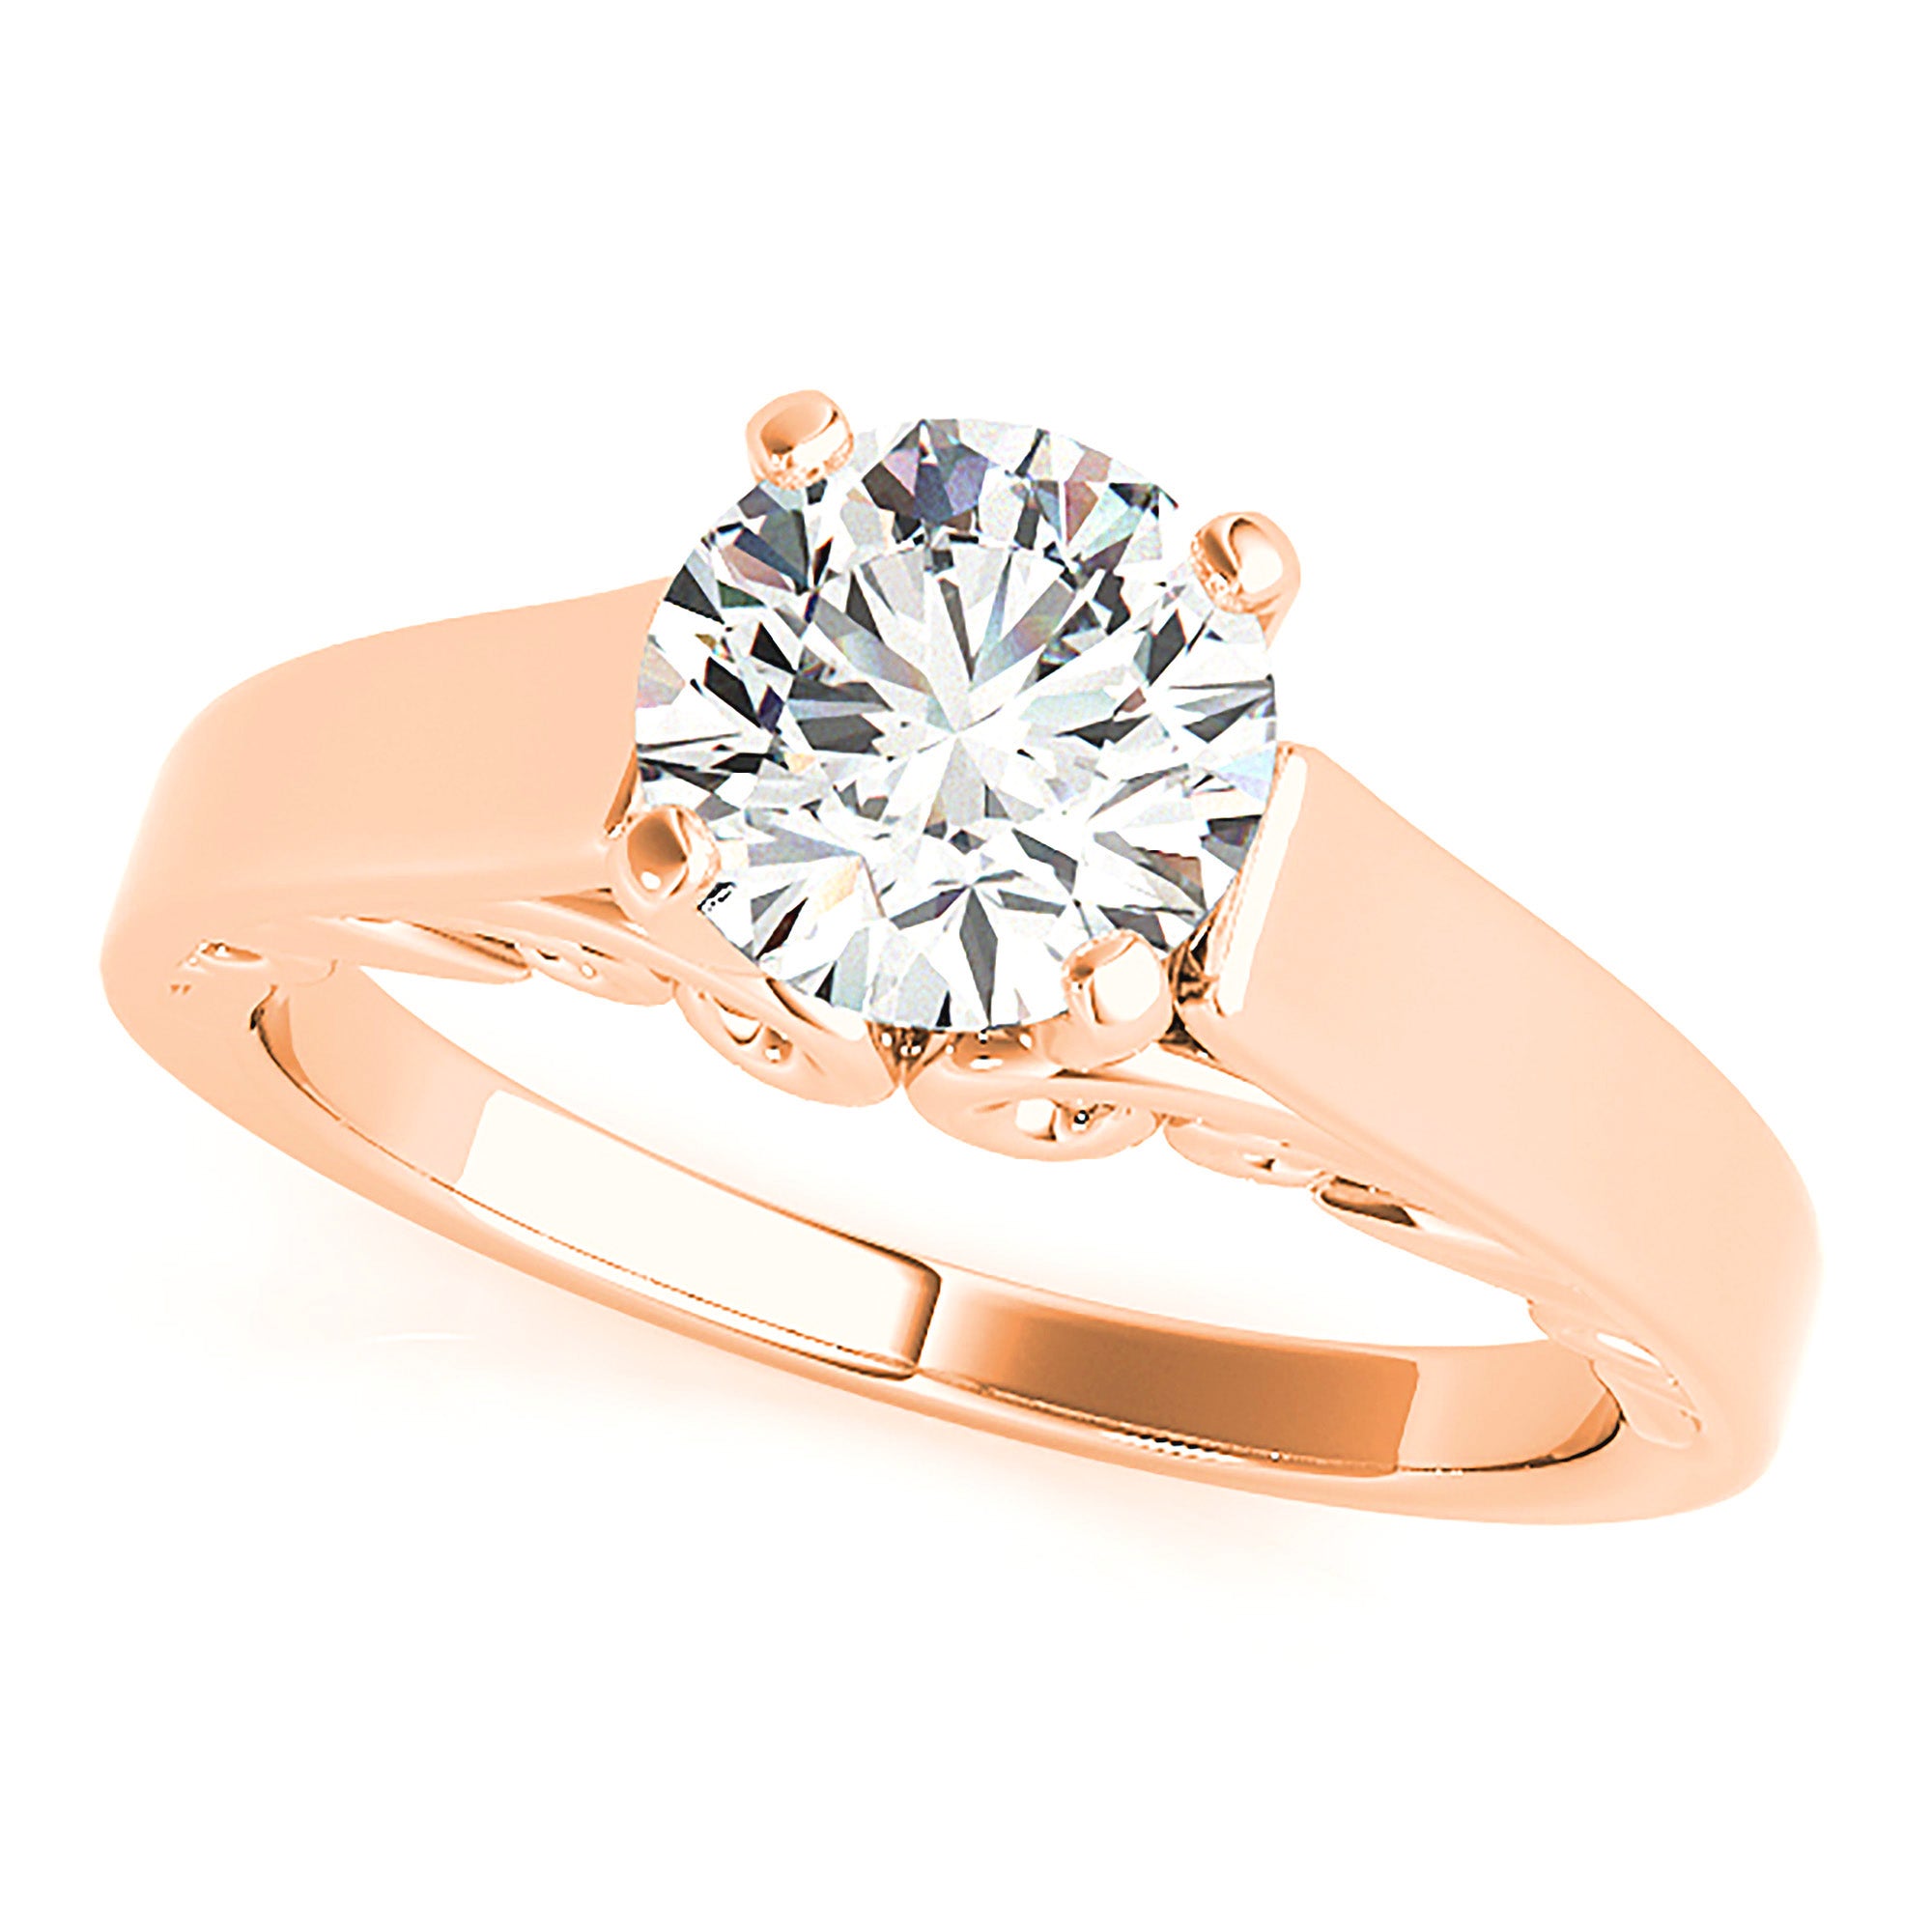 Vintage Inspired Solitaire Engagement Ring-in 14K/18K White, Yellow, Rose Gold and Platinum - Christmas Jewelry Gift -VIRABYANI